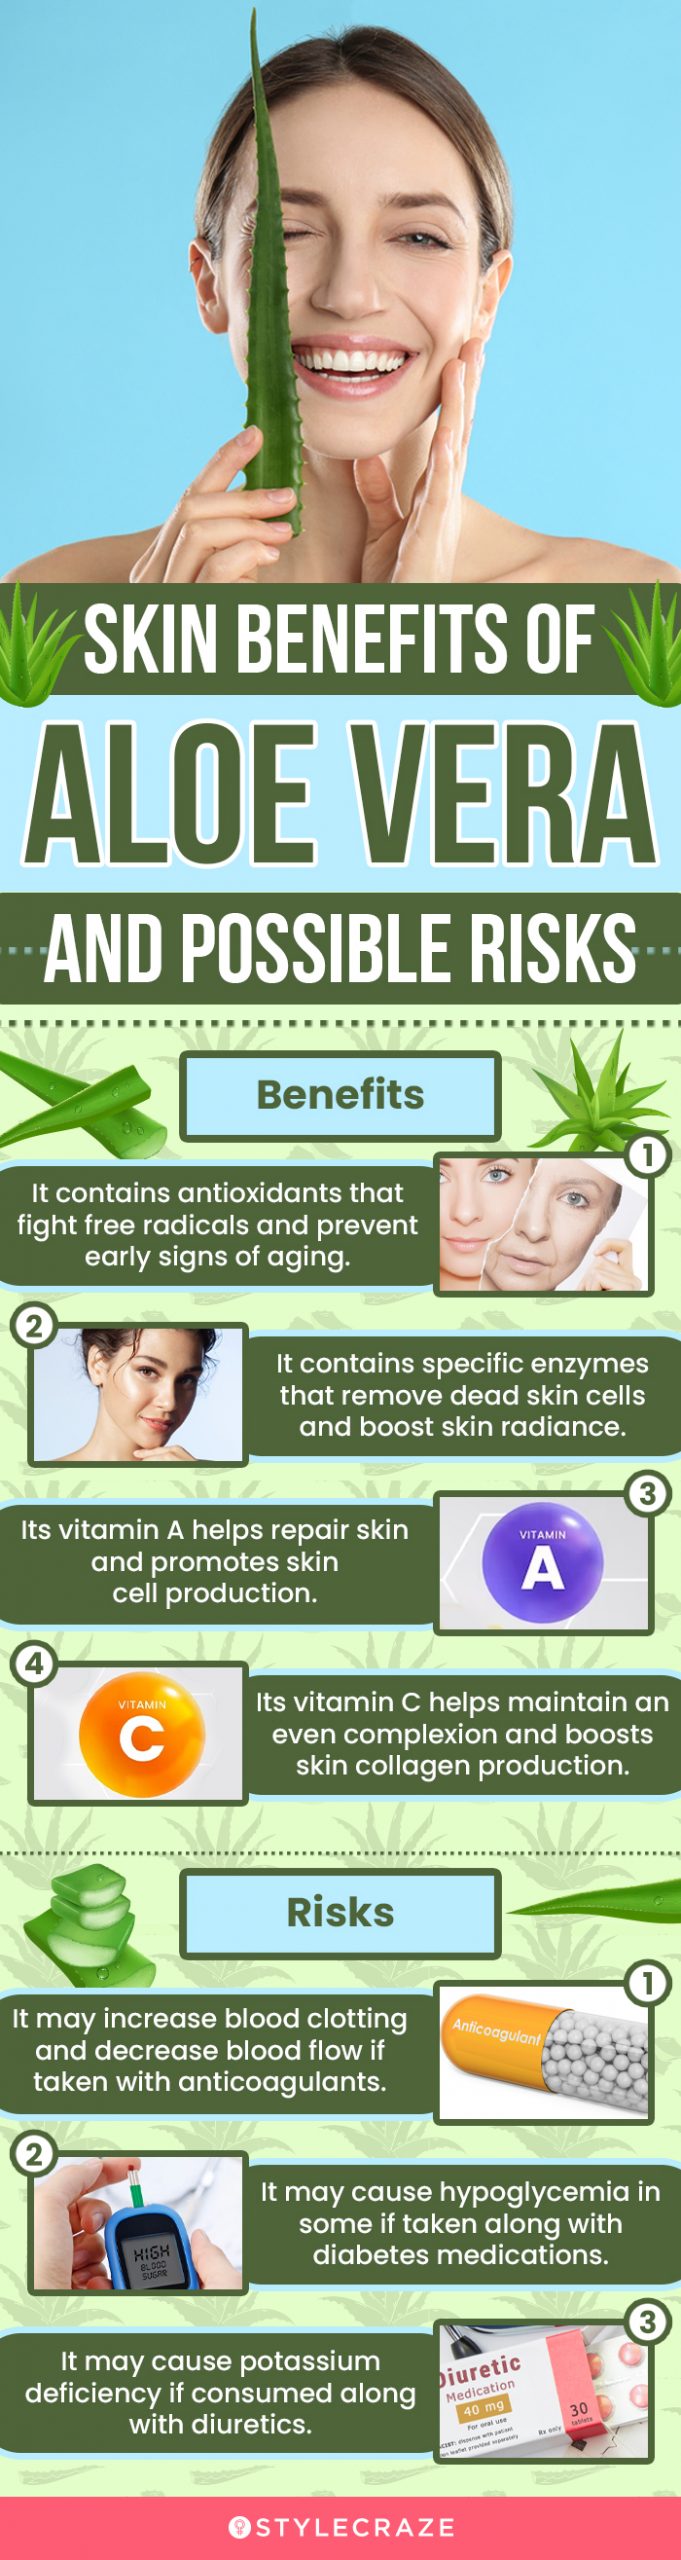 skin benefits of aloe vera and possible risks (infographic)